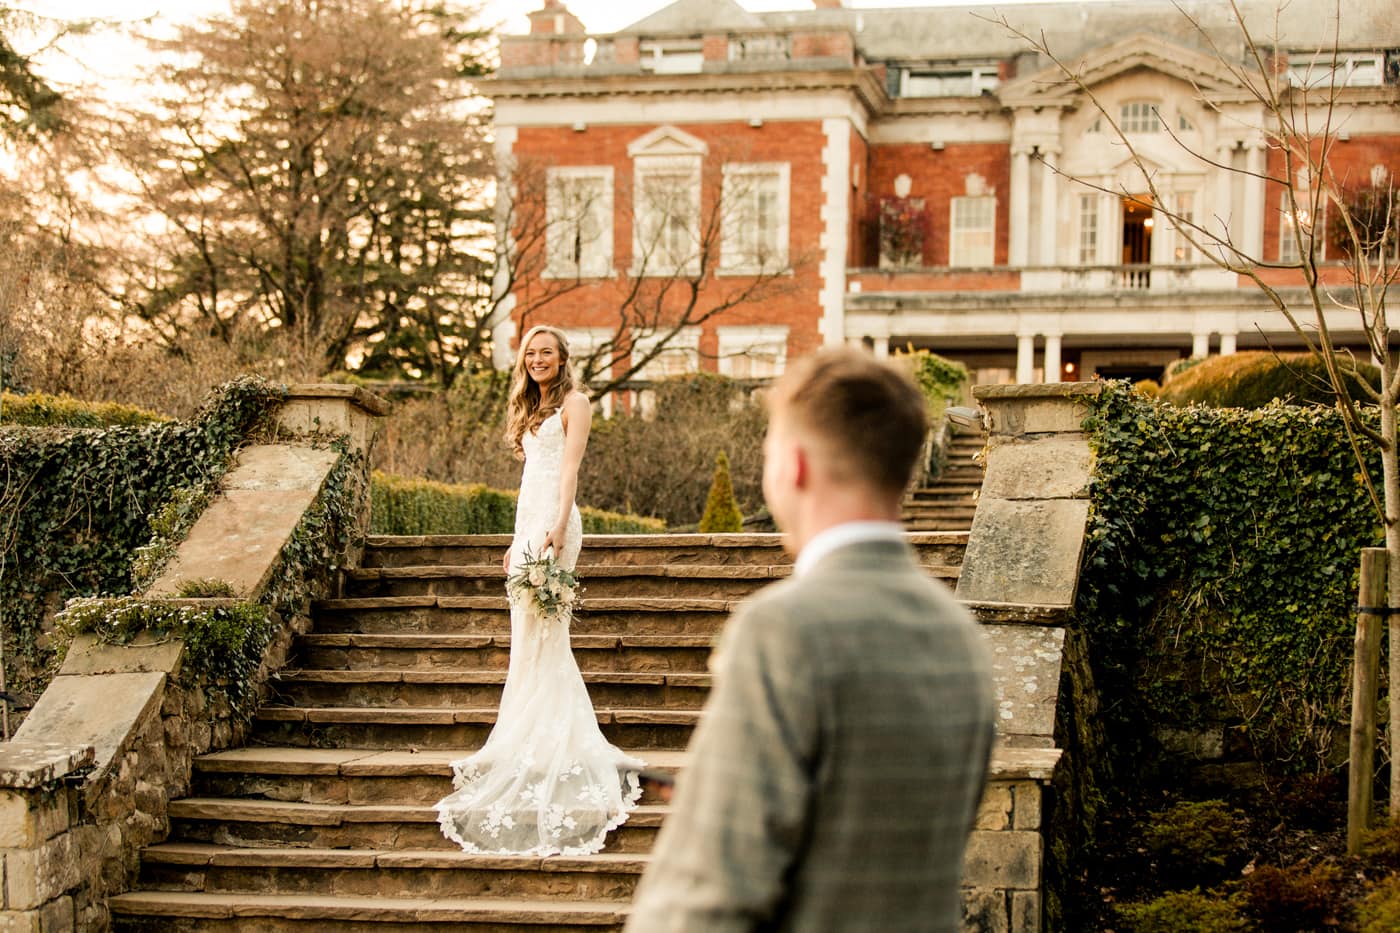 Lauren & Patrick having their portraits took at eaves hall in the gardens